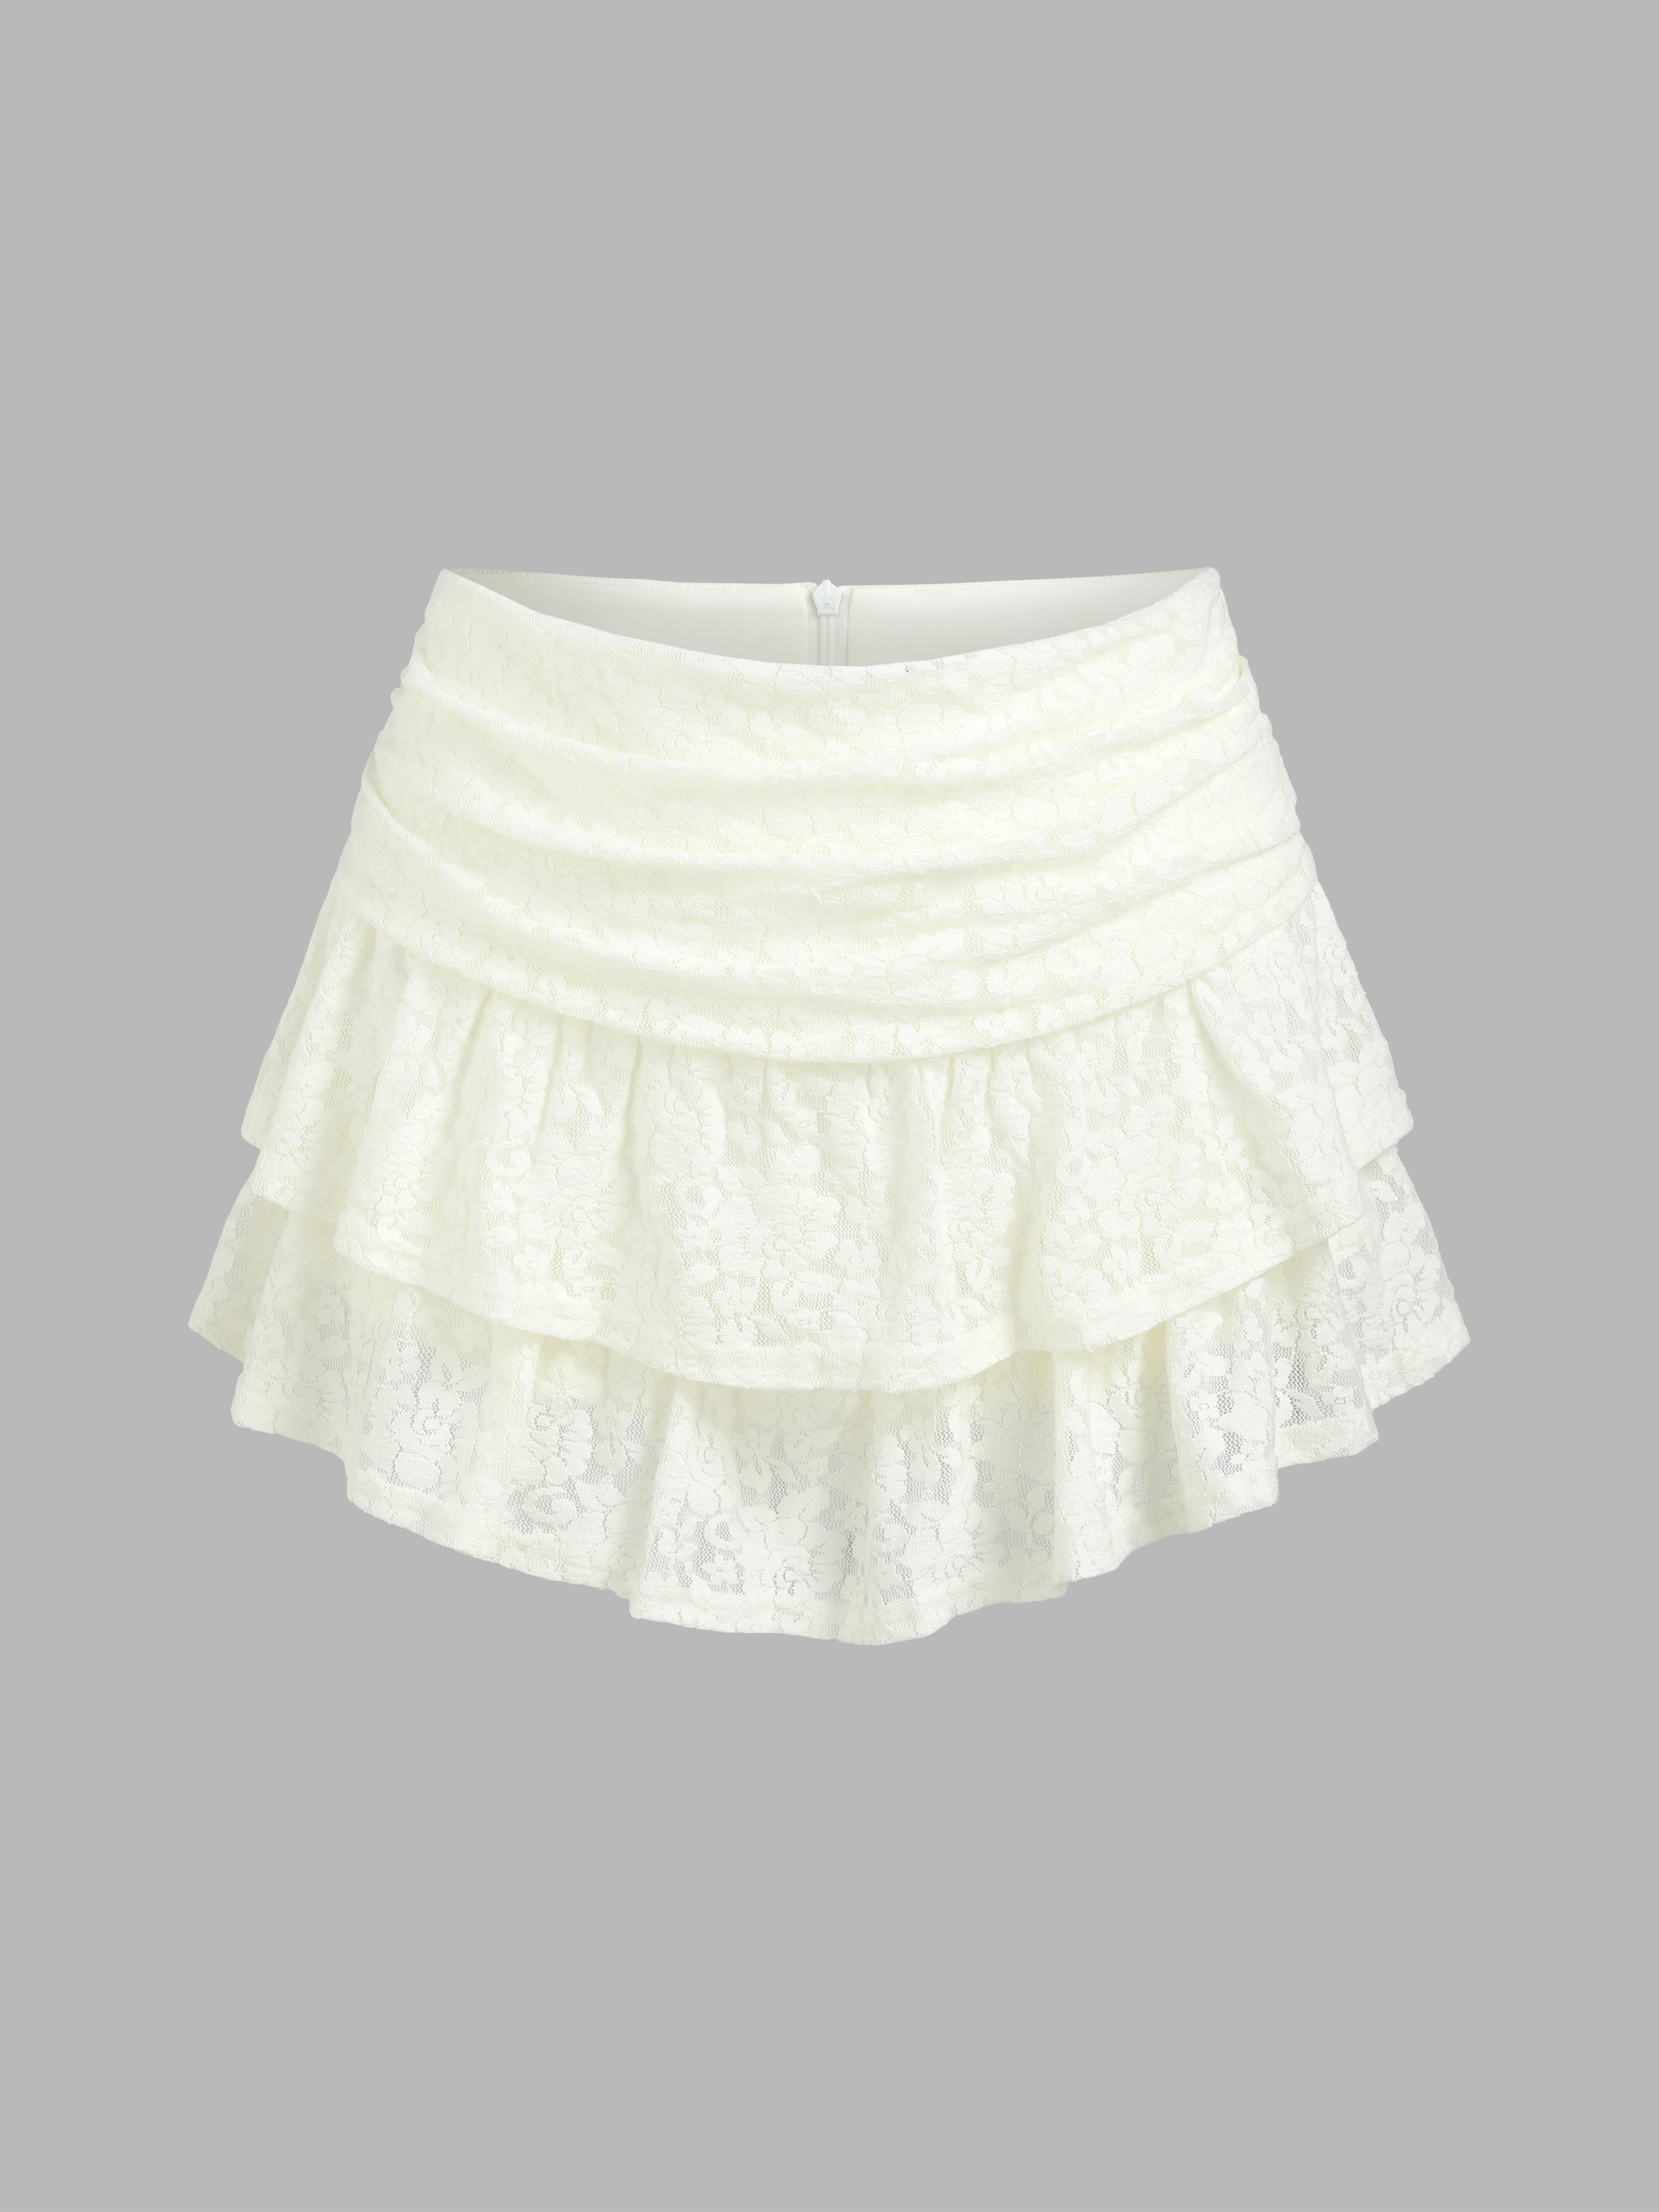 Santorini Beach Vacation Ruched Floral Lace Knit Layered Mini Skort